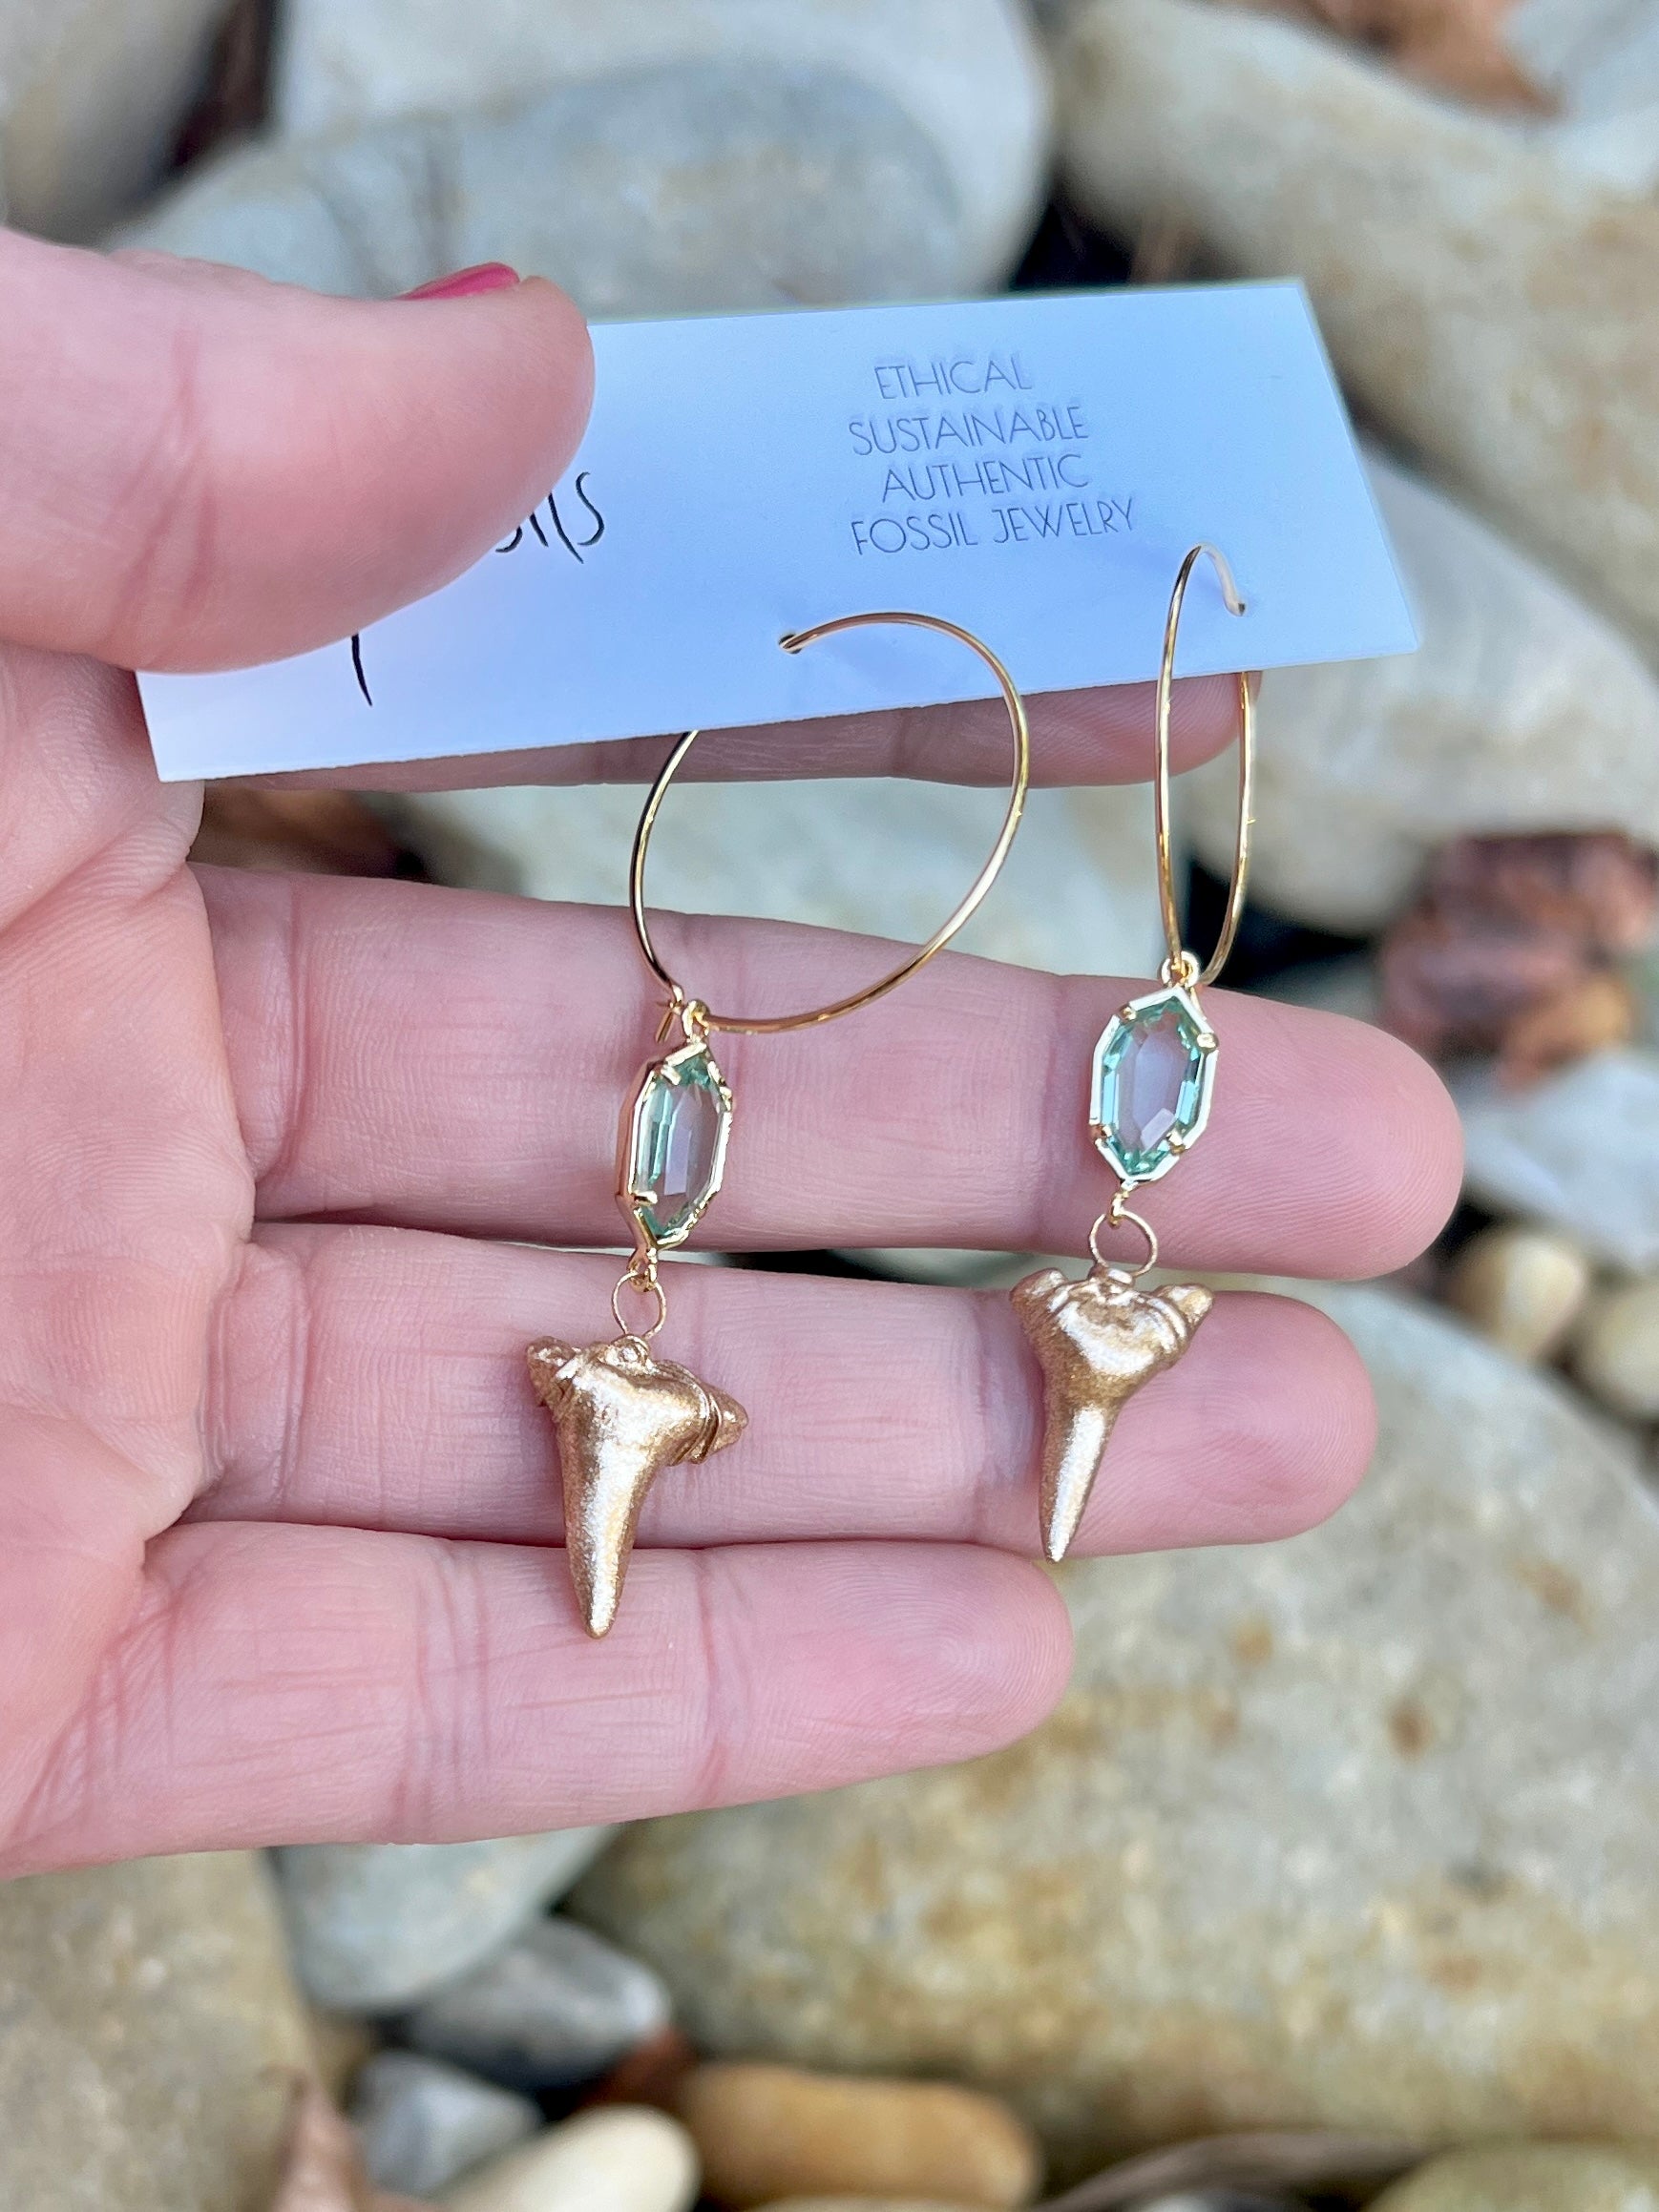 Elegant fossil shark tooth hoop earrings Charleston-gold shark teeth hoops—Foxy Fossils ethically sourced fossils original shark tooth jewelry 